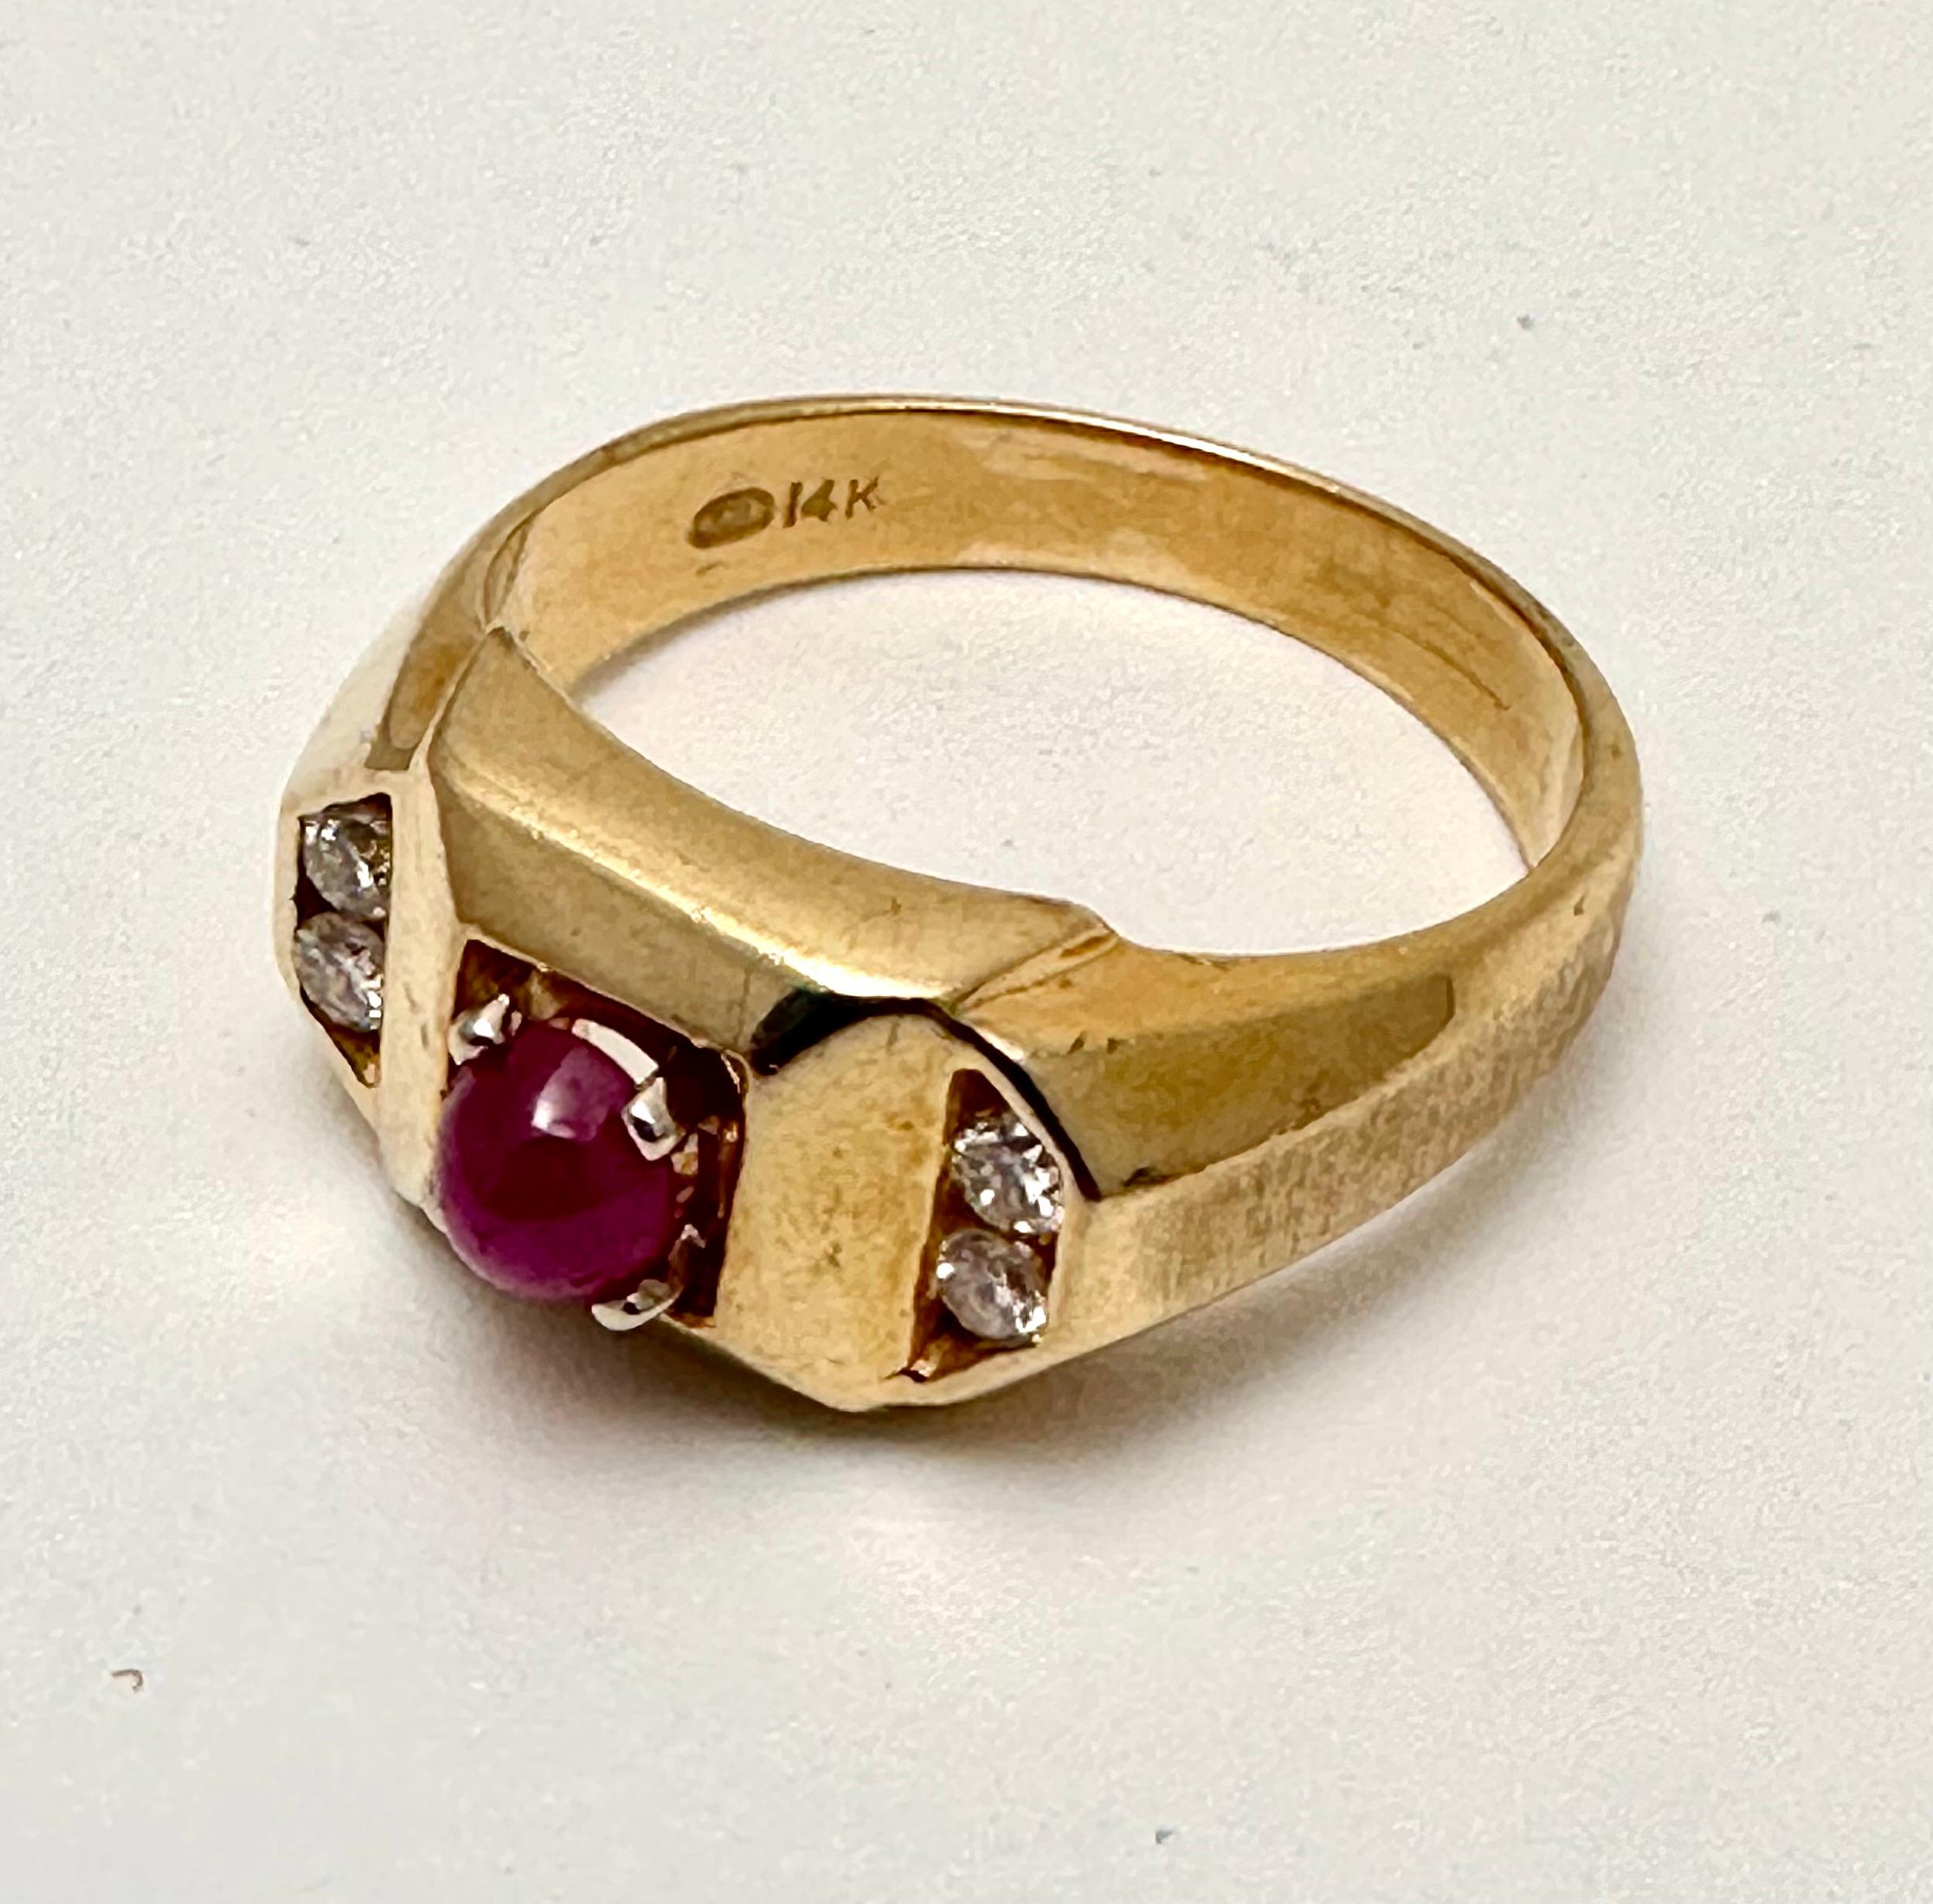 Women's or Men's 14k Yellow Gold 5mm Cabochon Ruby with 4 Round Diamonds Ring Size 9 1/2 For Sale